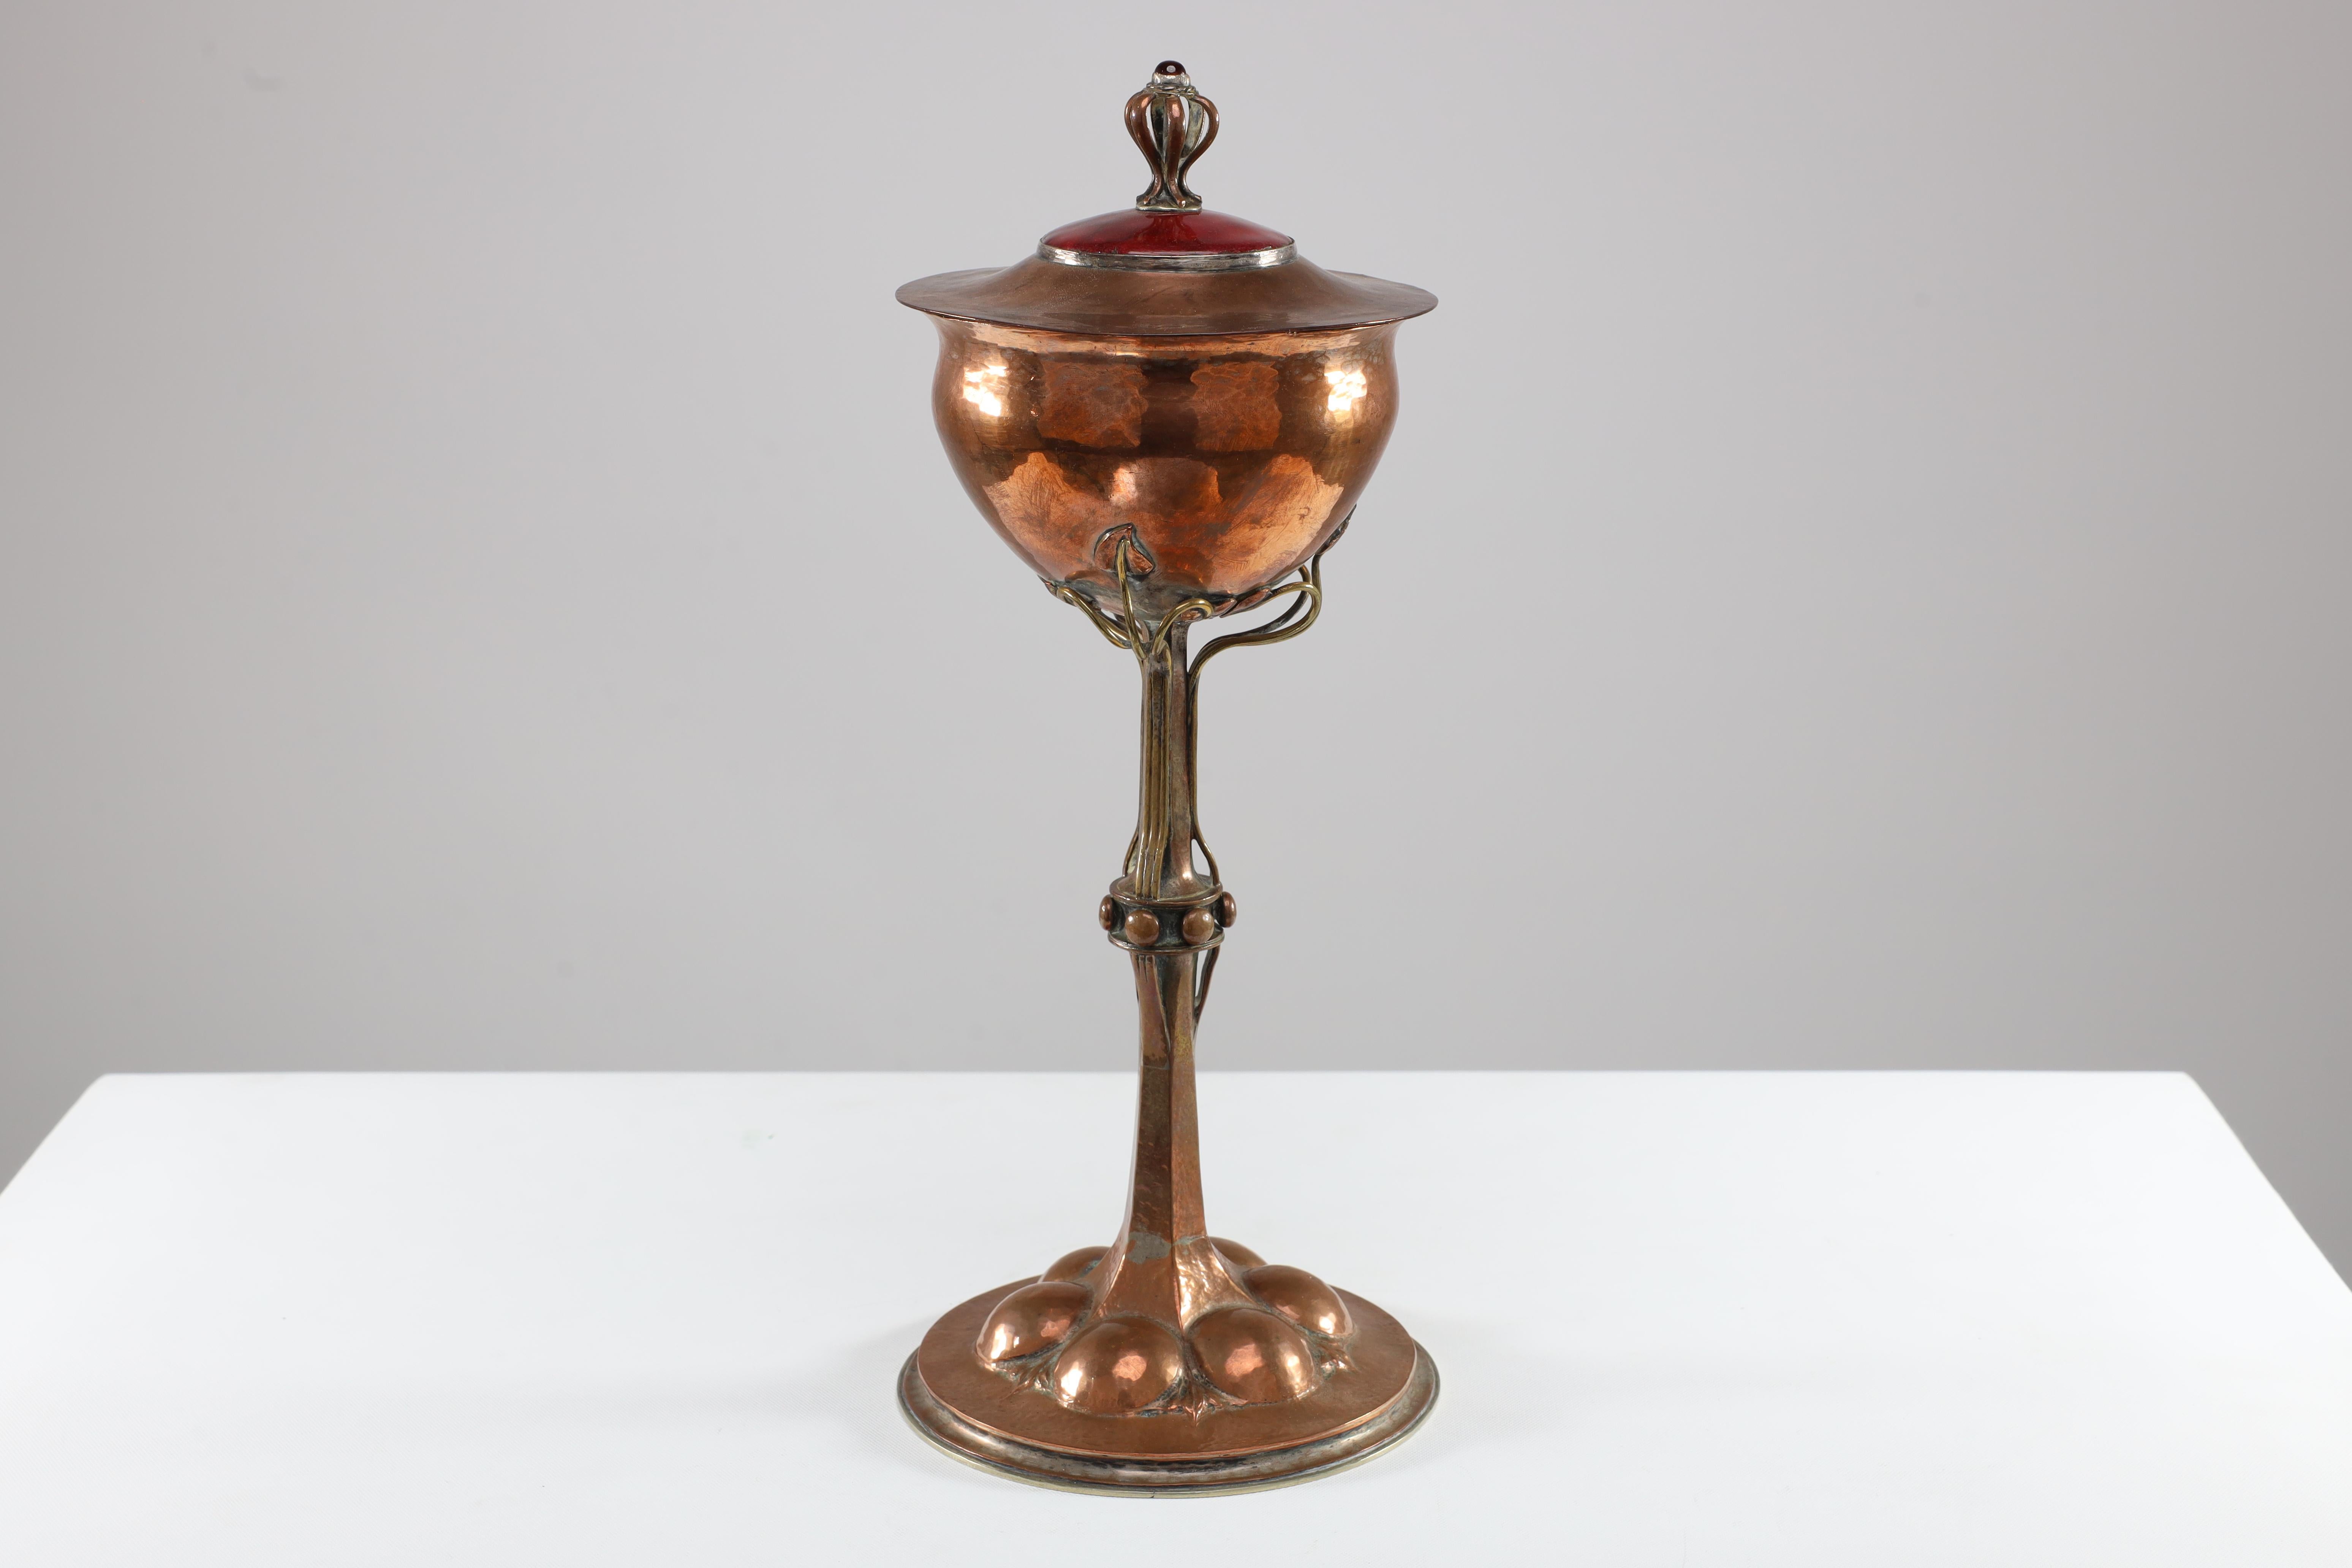 C R Ashbee. Made by The Guild of Handicrafts. An Arts and Crafts Copper chalice. The lid with semi-precious red stone to the wirework handle rising from a red enamel circular plaque. The bowl is attached to the stem with sinious wirework emulating